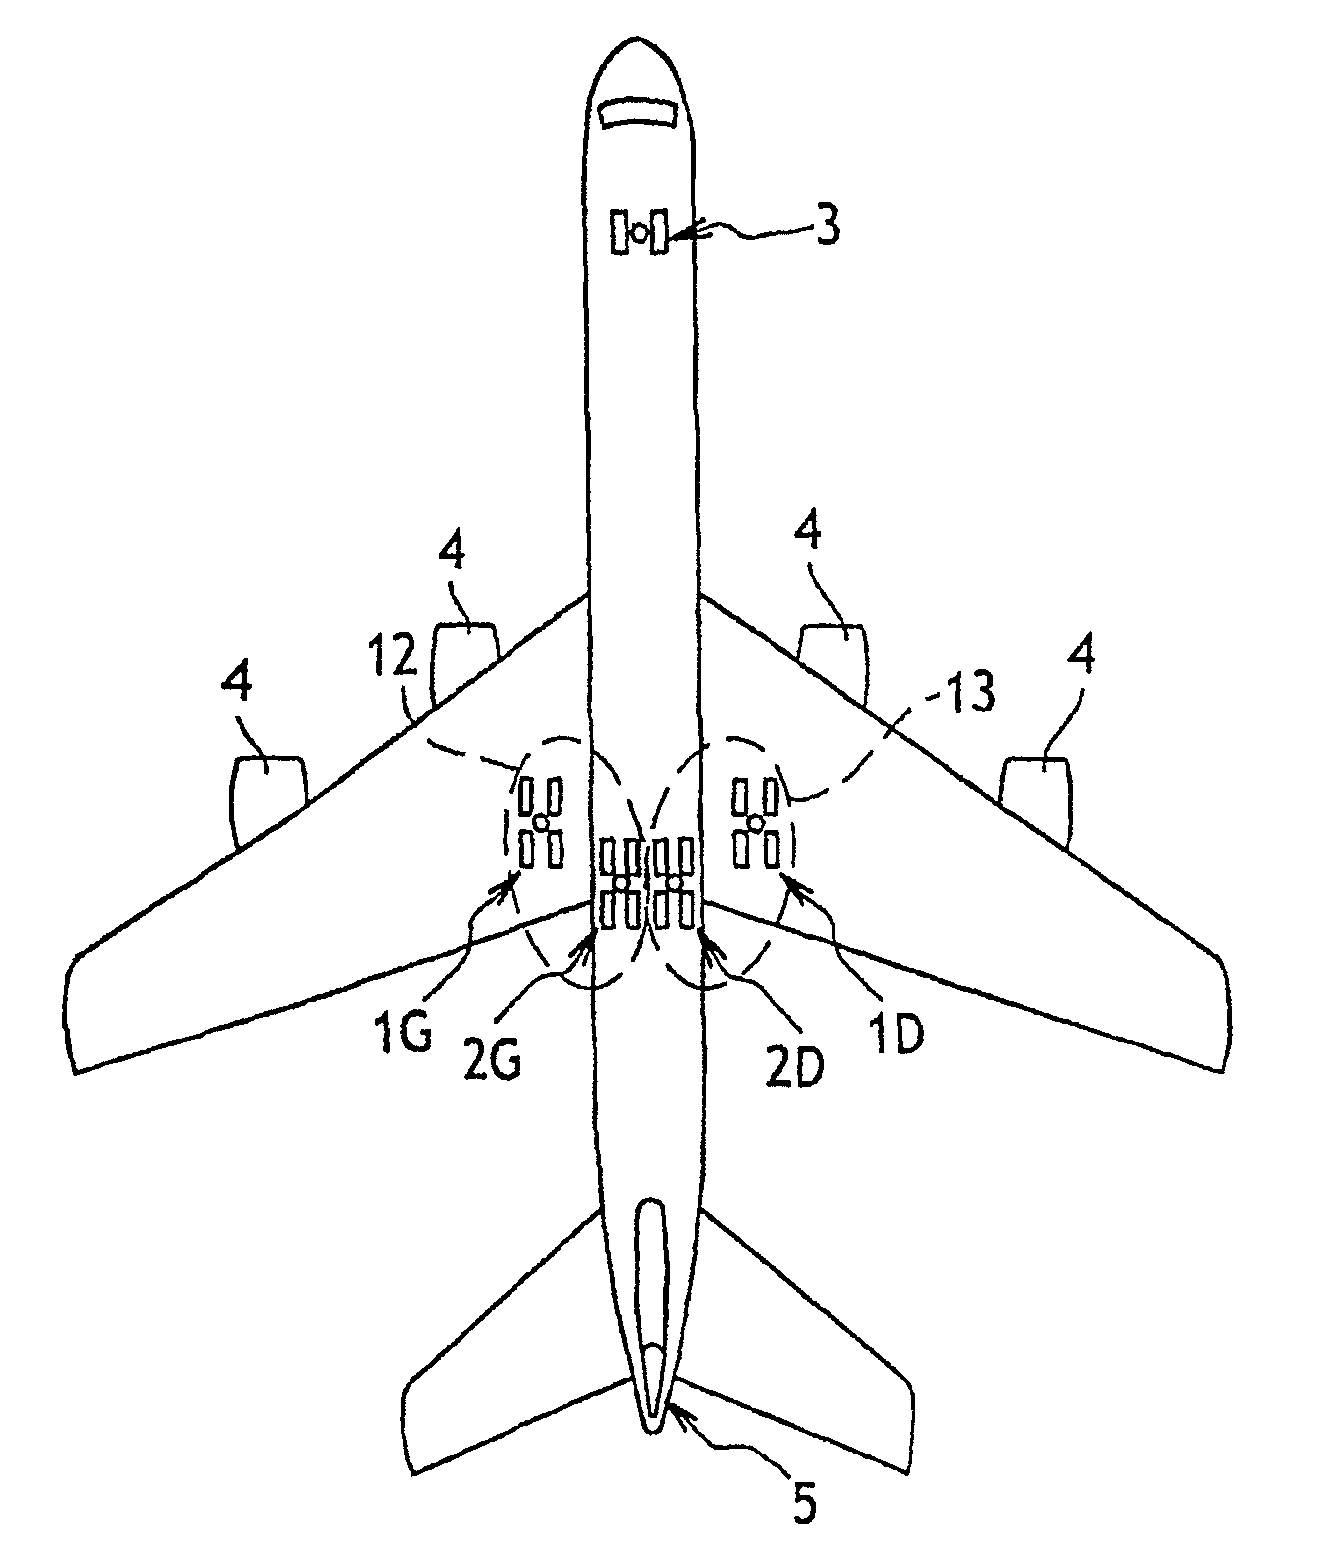 Method of distributing braking within at least one group of brakes of an aircraft